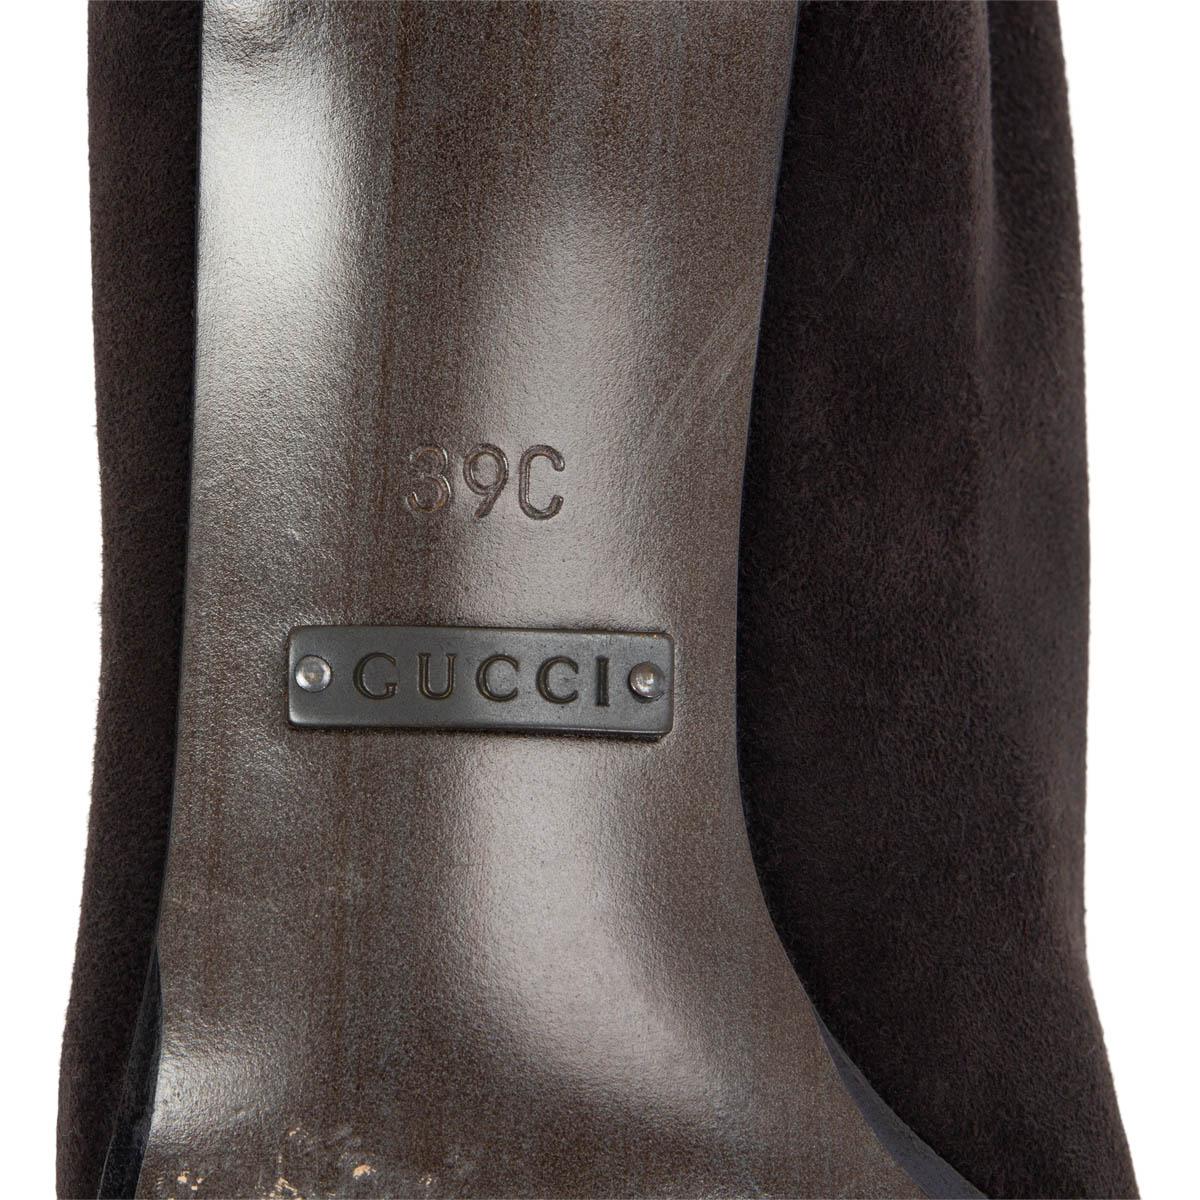 Women's GUCCI dark brown suede POINTE TOE MID CALF Boots Shoes 39